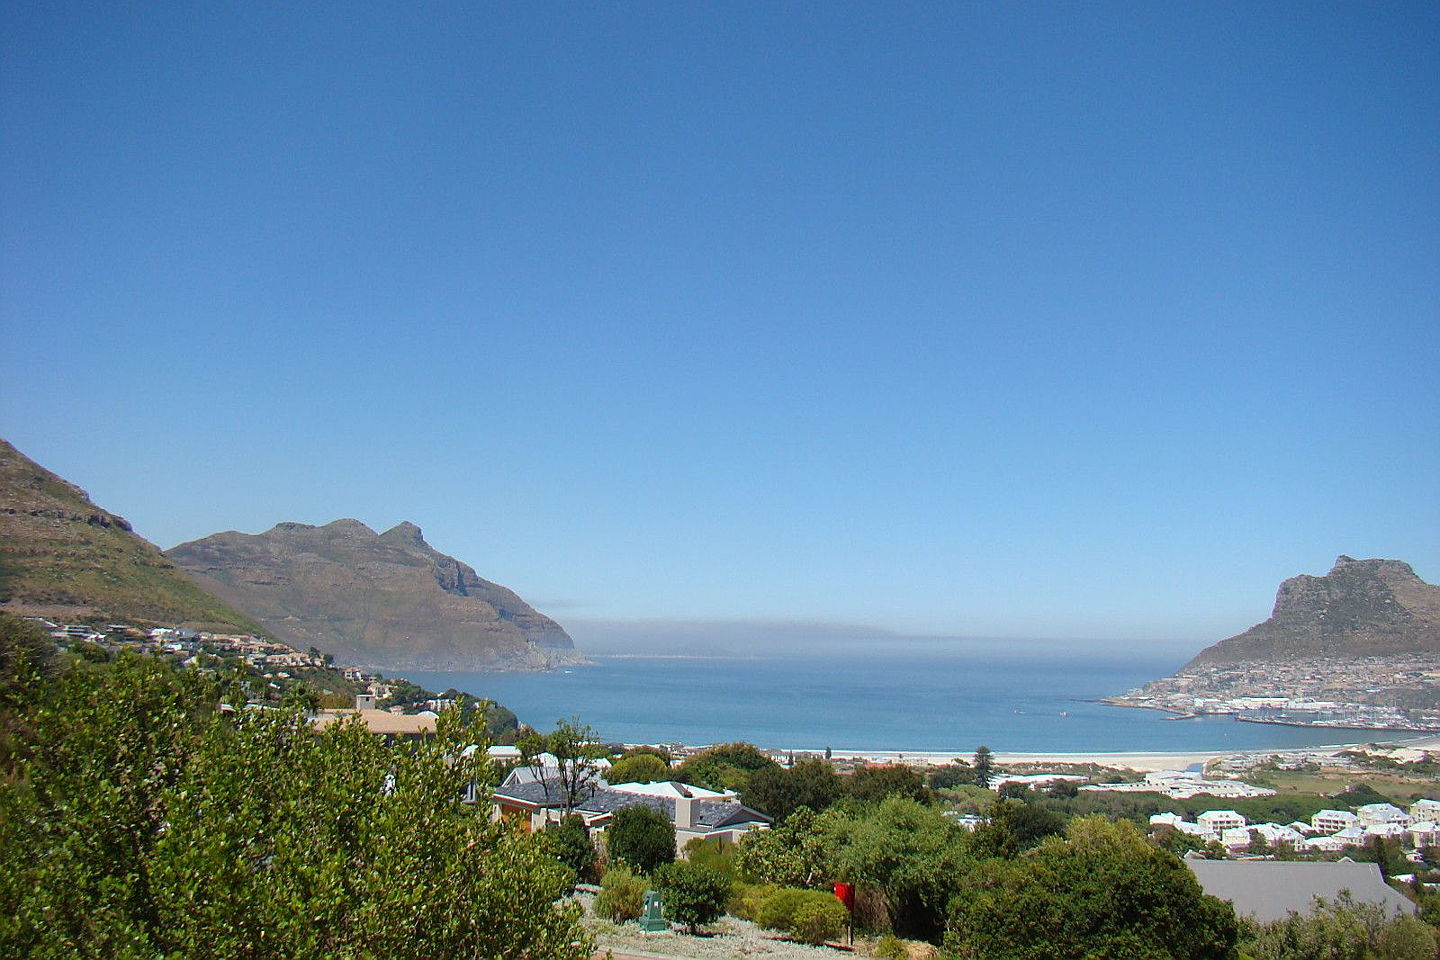  Cape Town
- 1085125_large.jpg